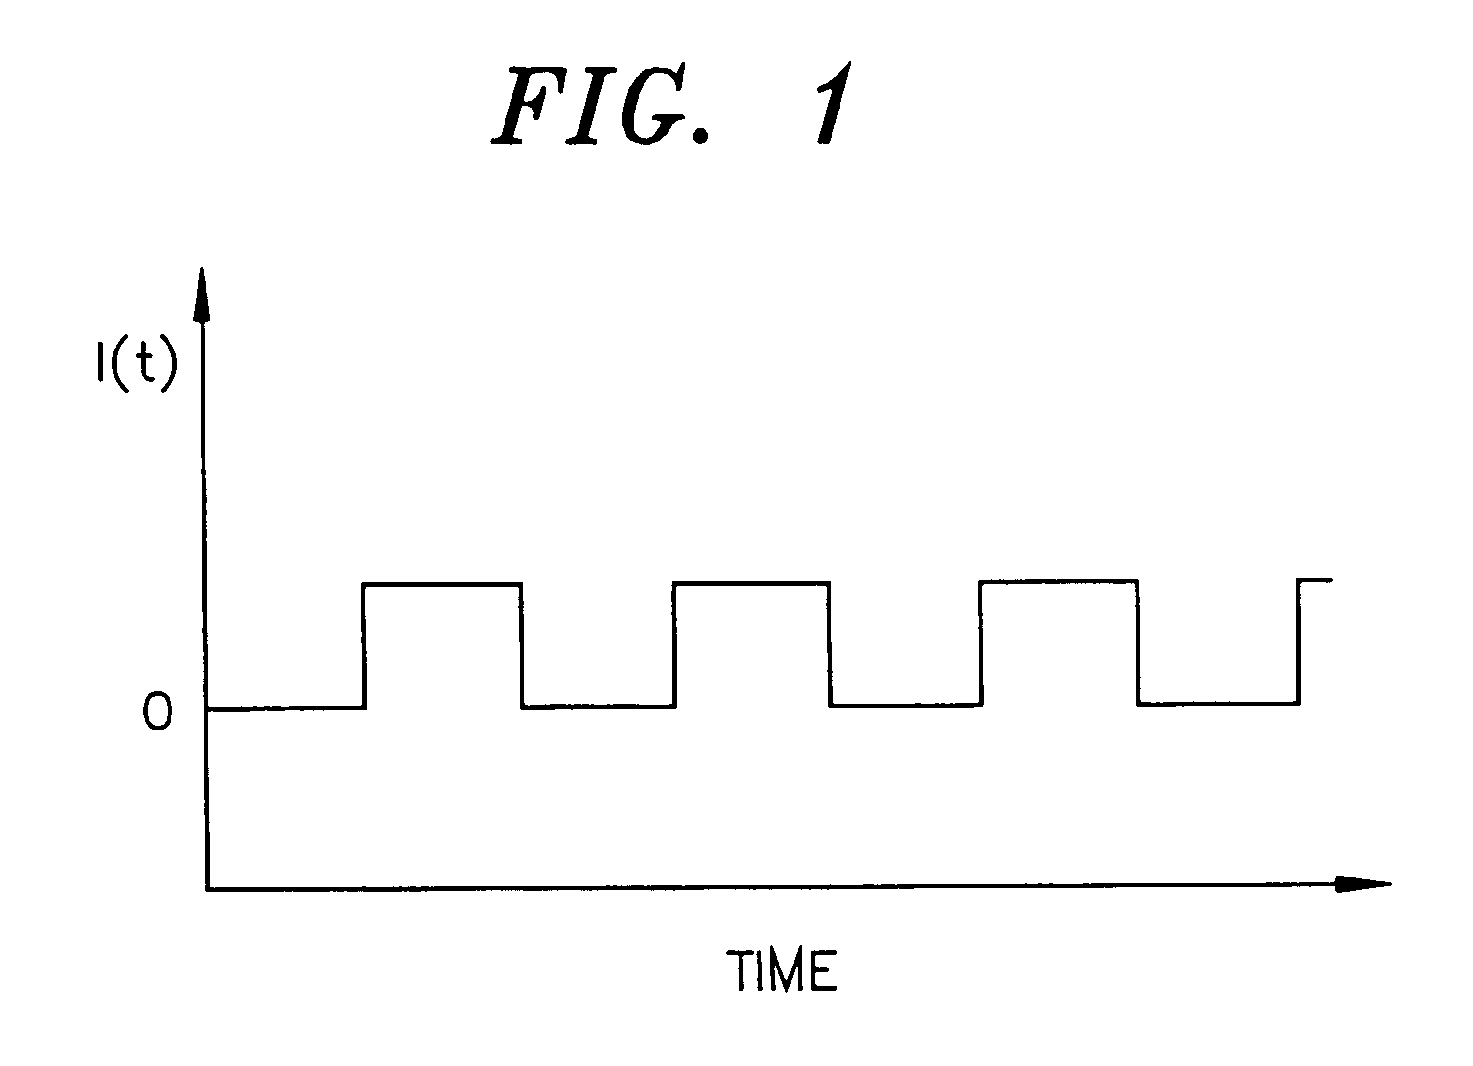 Heater and temperature measurement system